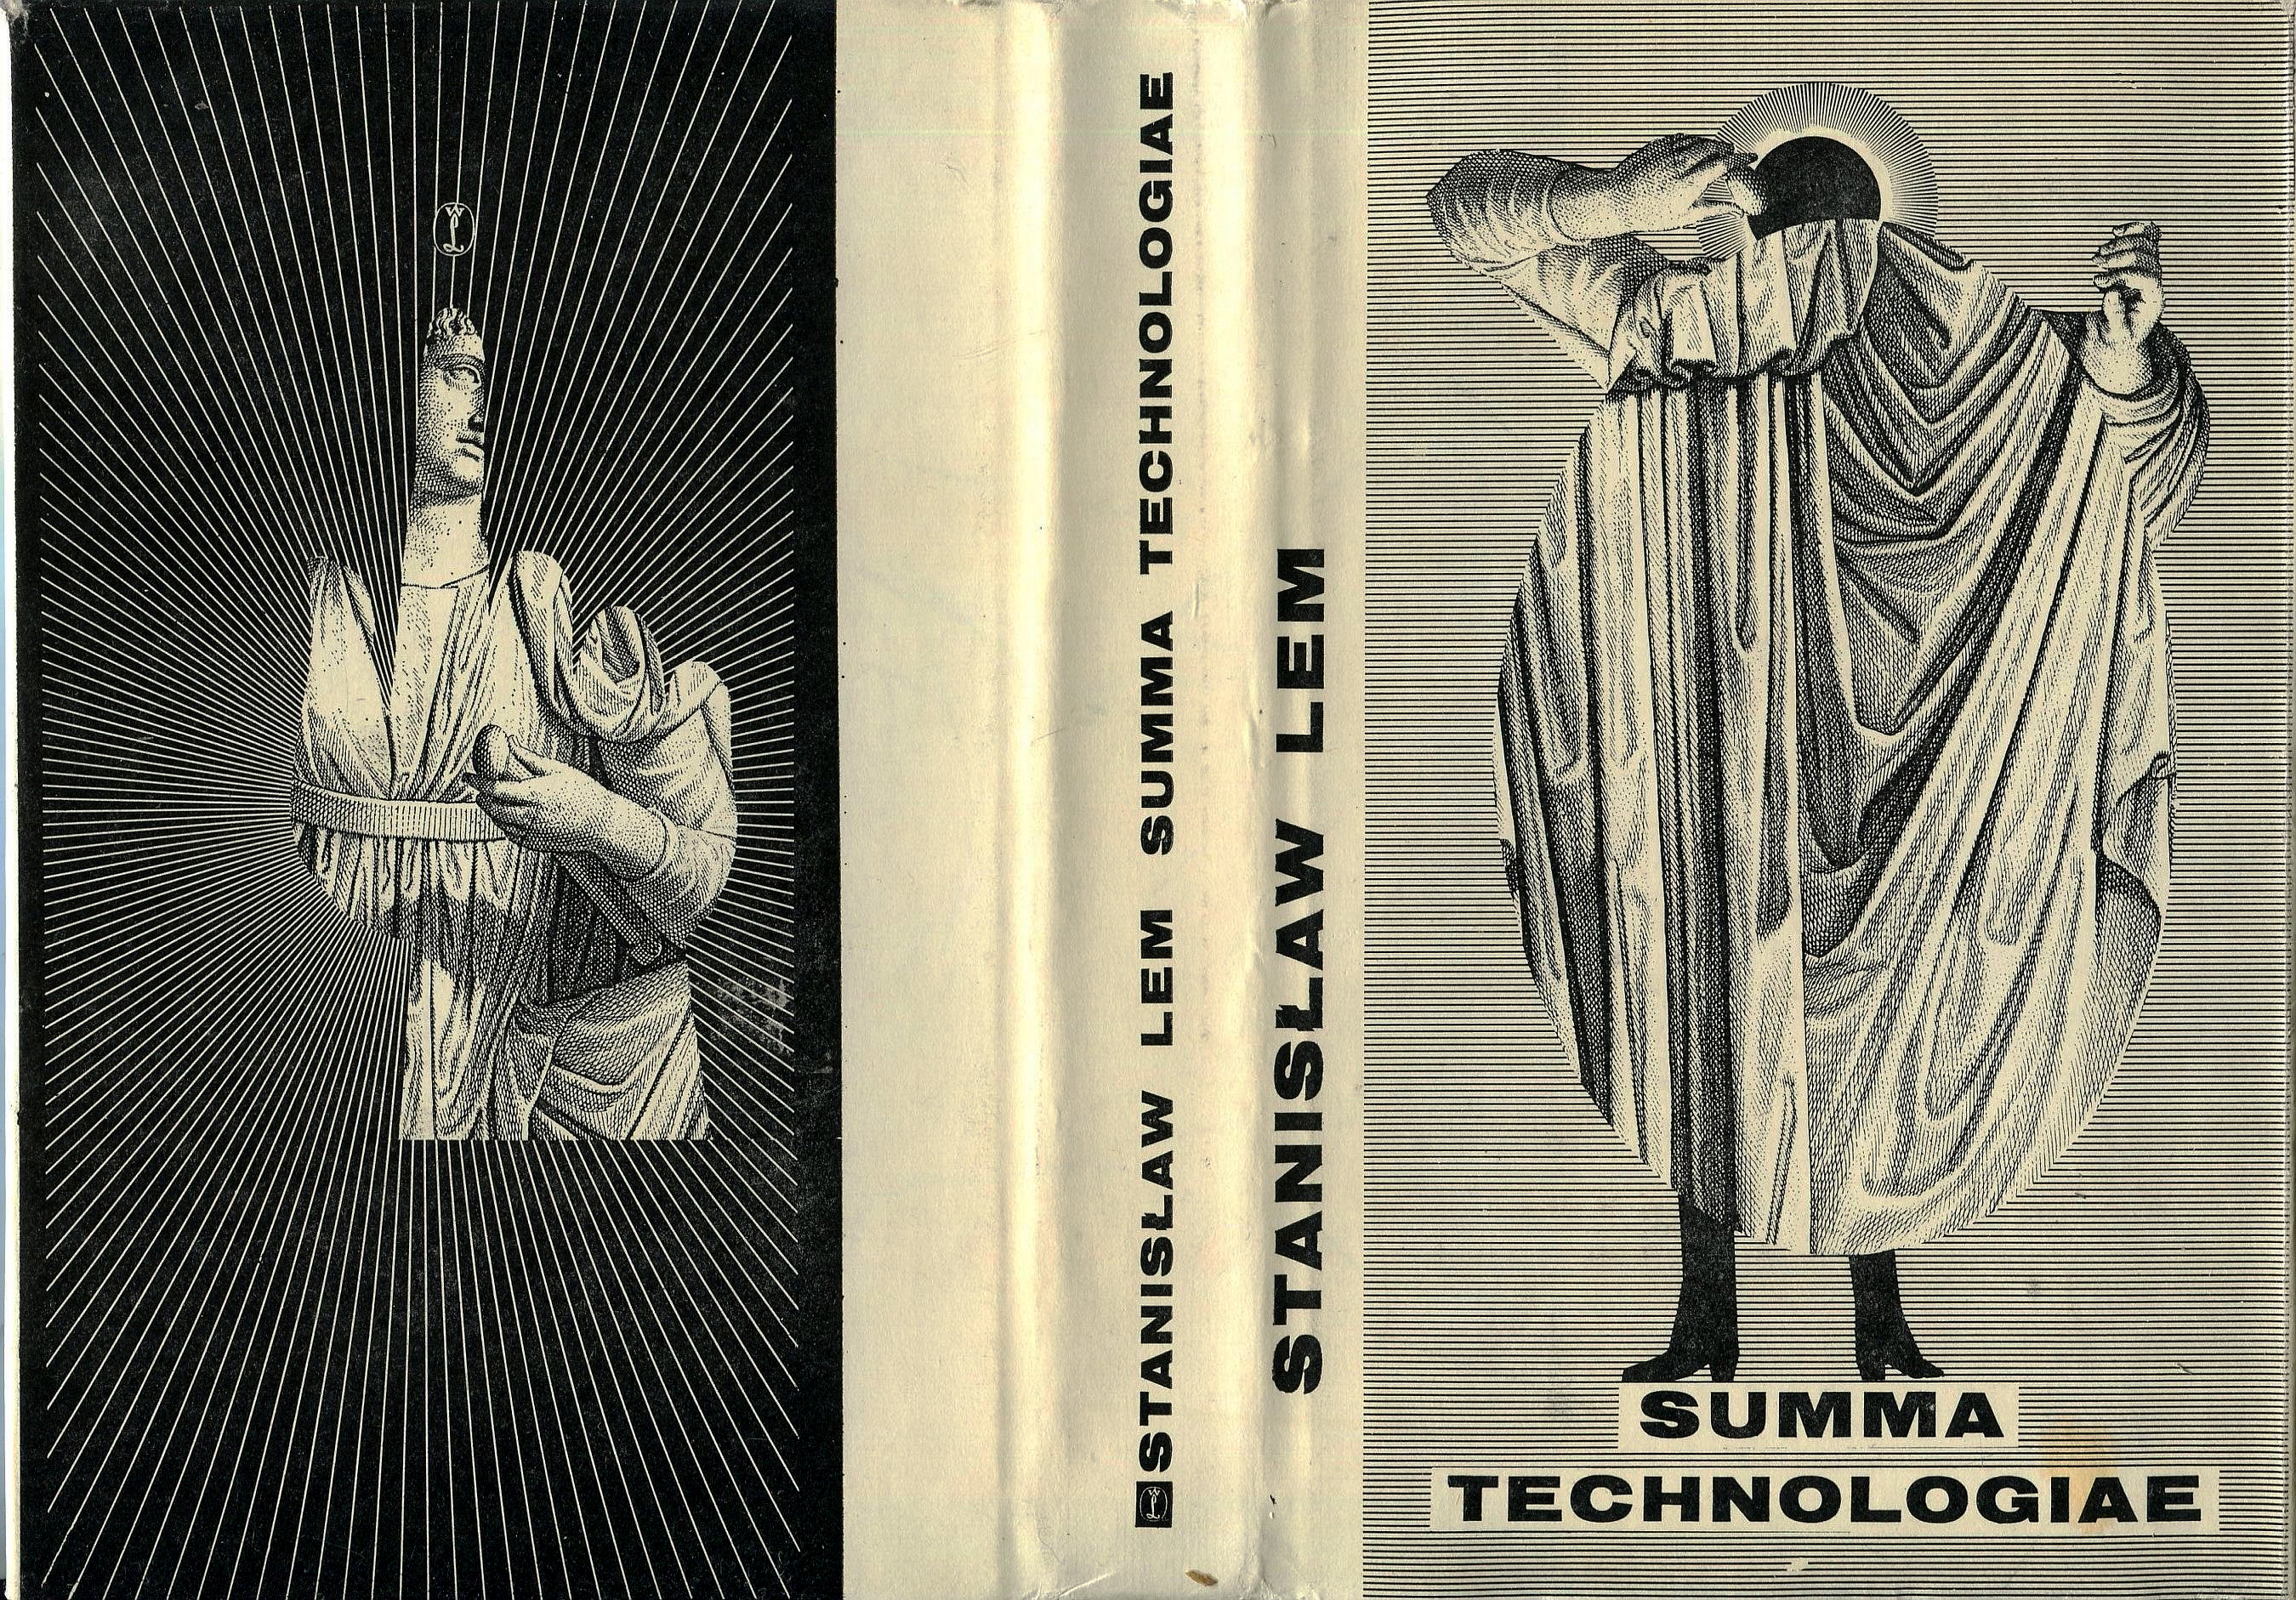 Stanisław Lem , Summa Technologiae (1964) with an actualized cover illustration by Daniel Mróz from the edition of 1974.